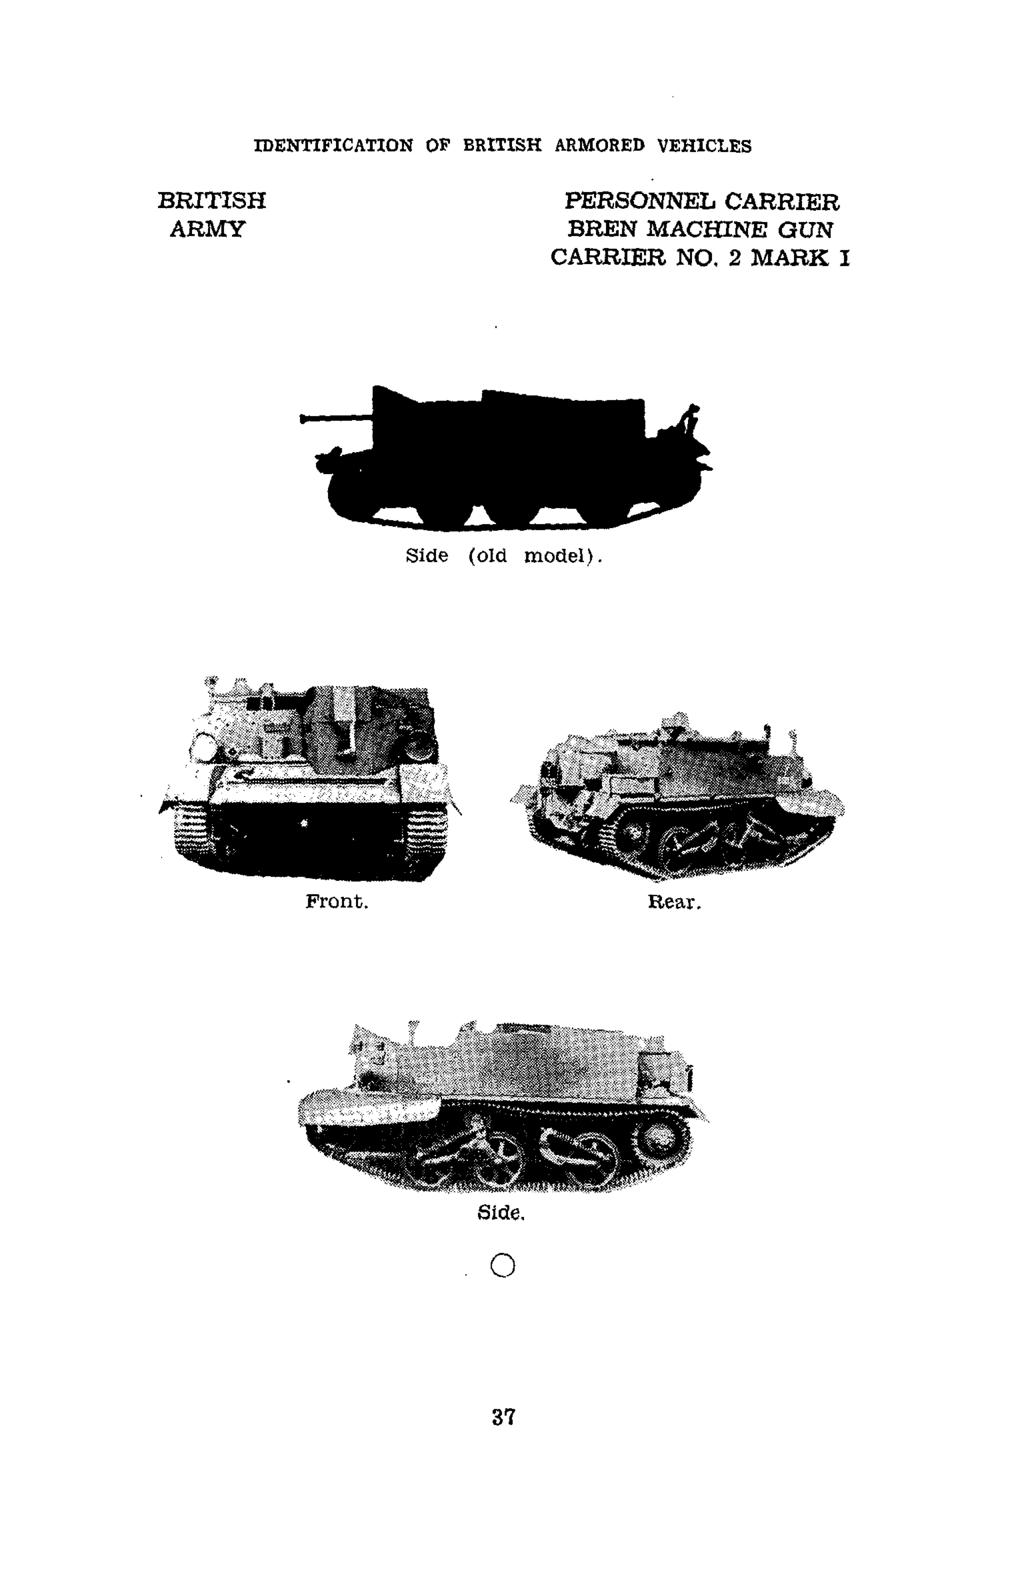 IDENTIFICATION OF ARMORED VEHICLES PERSONNEL CARRIER BREN MACHINE